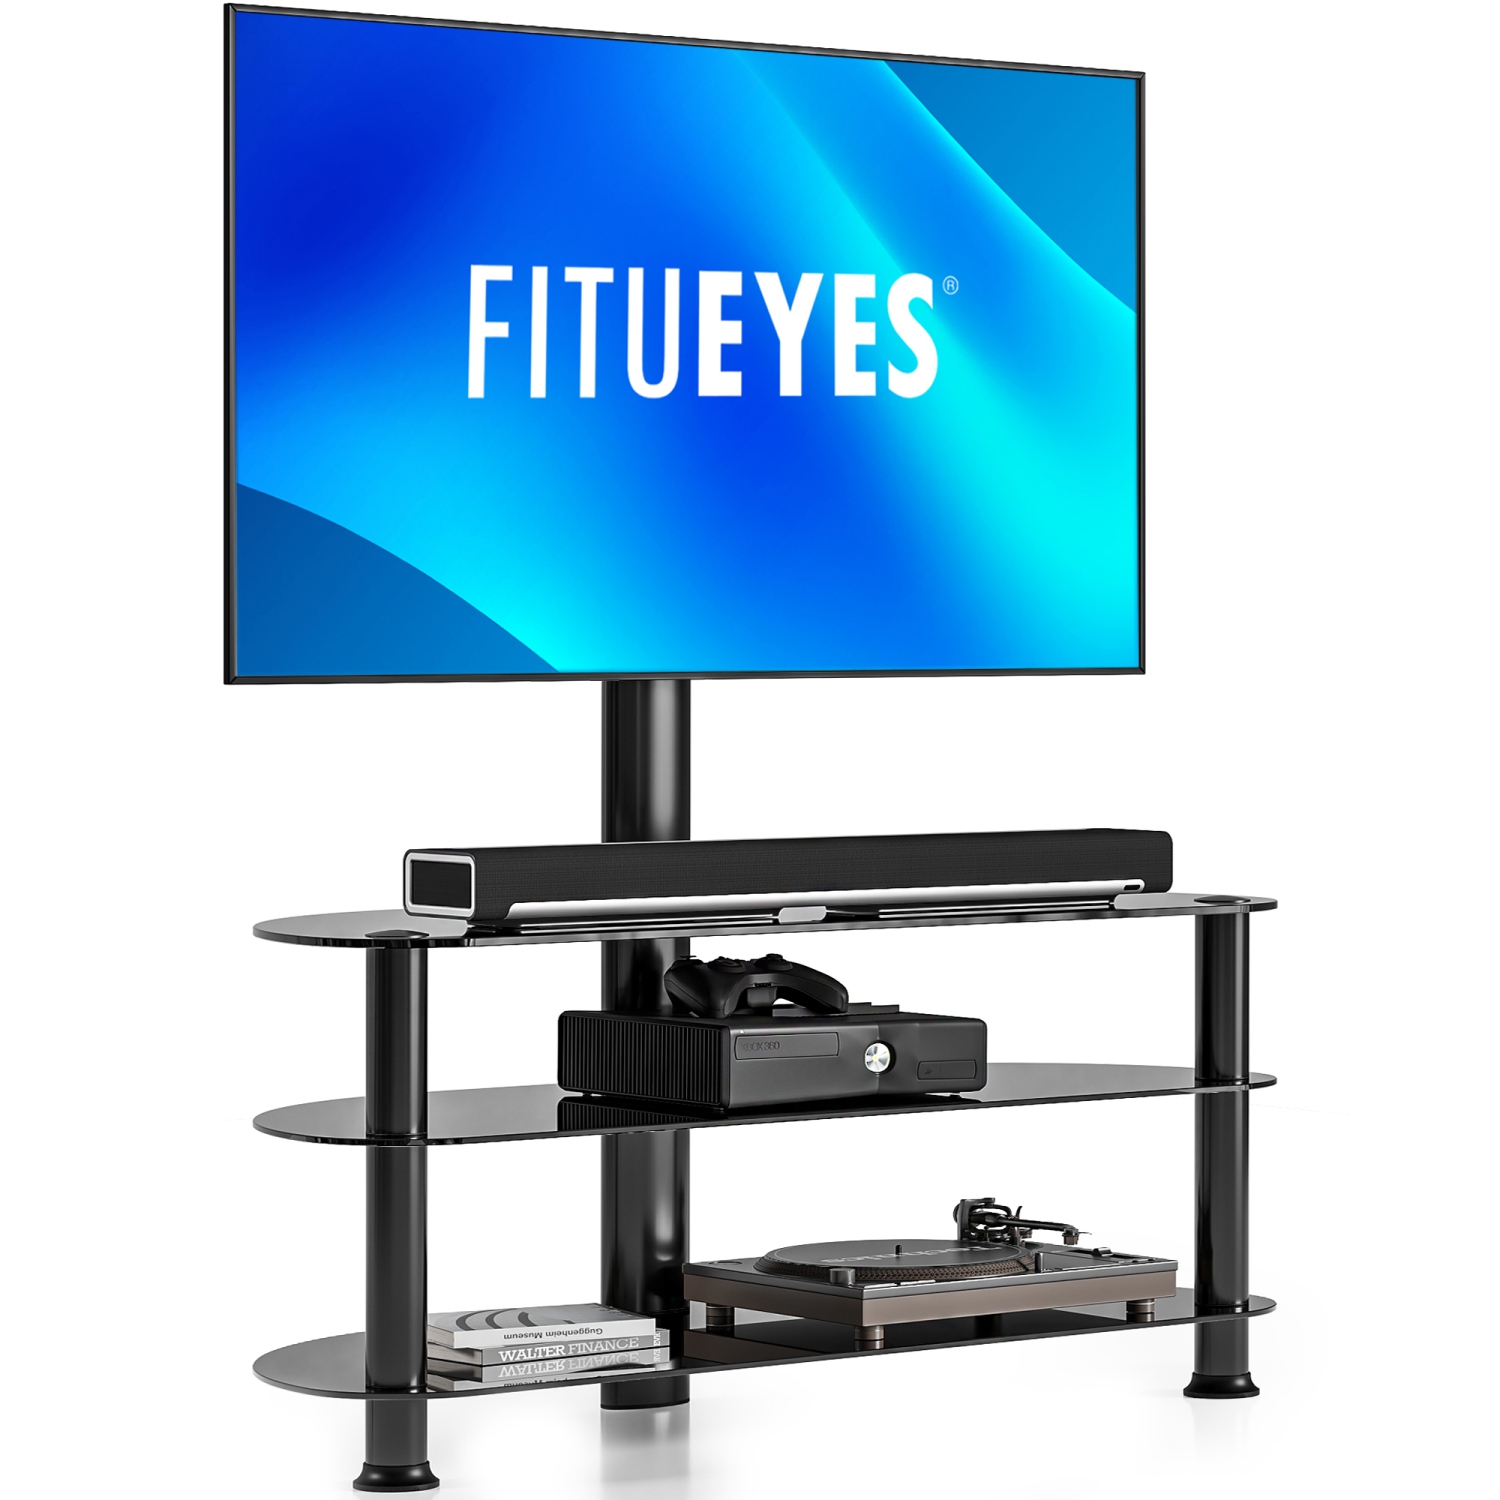 FITUEYES Floor TV Stand with Mount 3-Tier Media Stand for 32 to 65 inch TV with Swivel and Height Adjustable Max VESA 600x400 mm